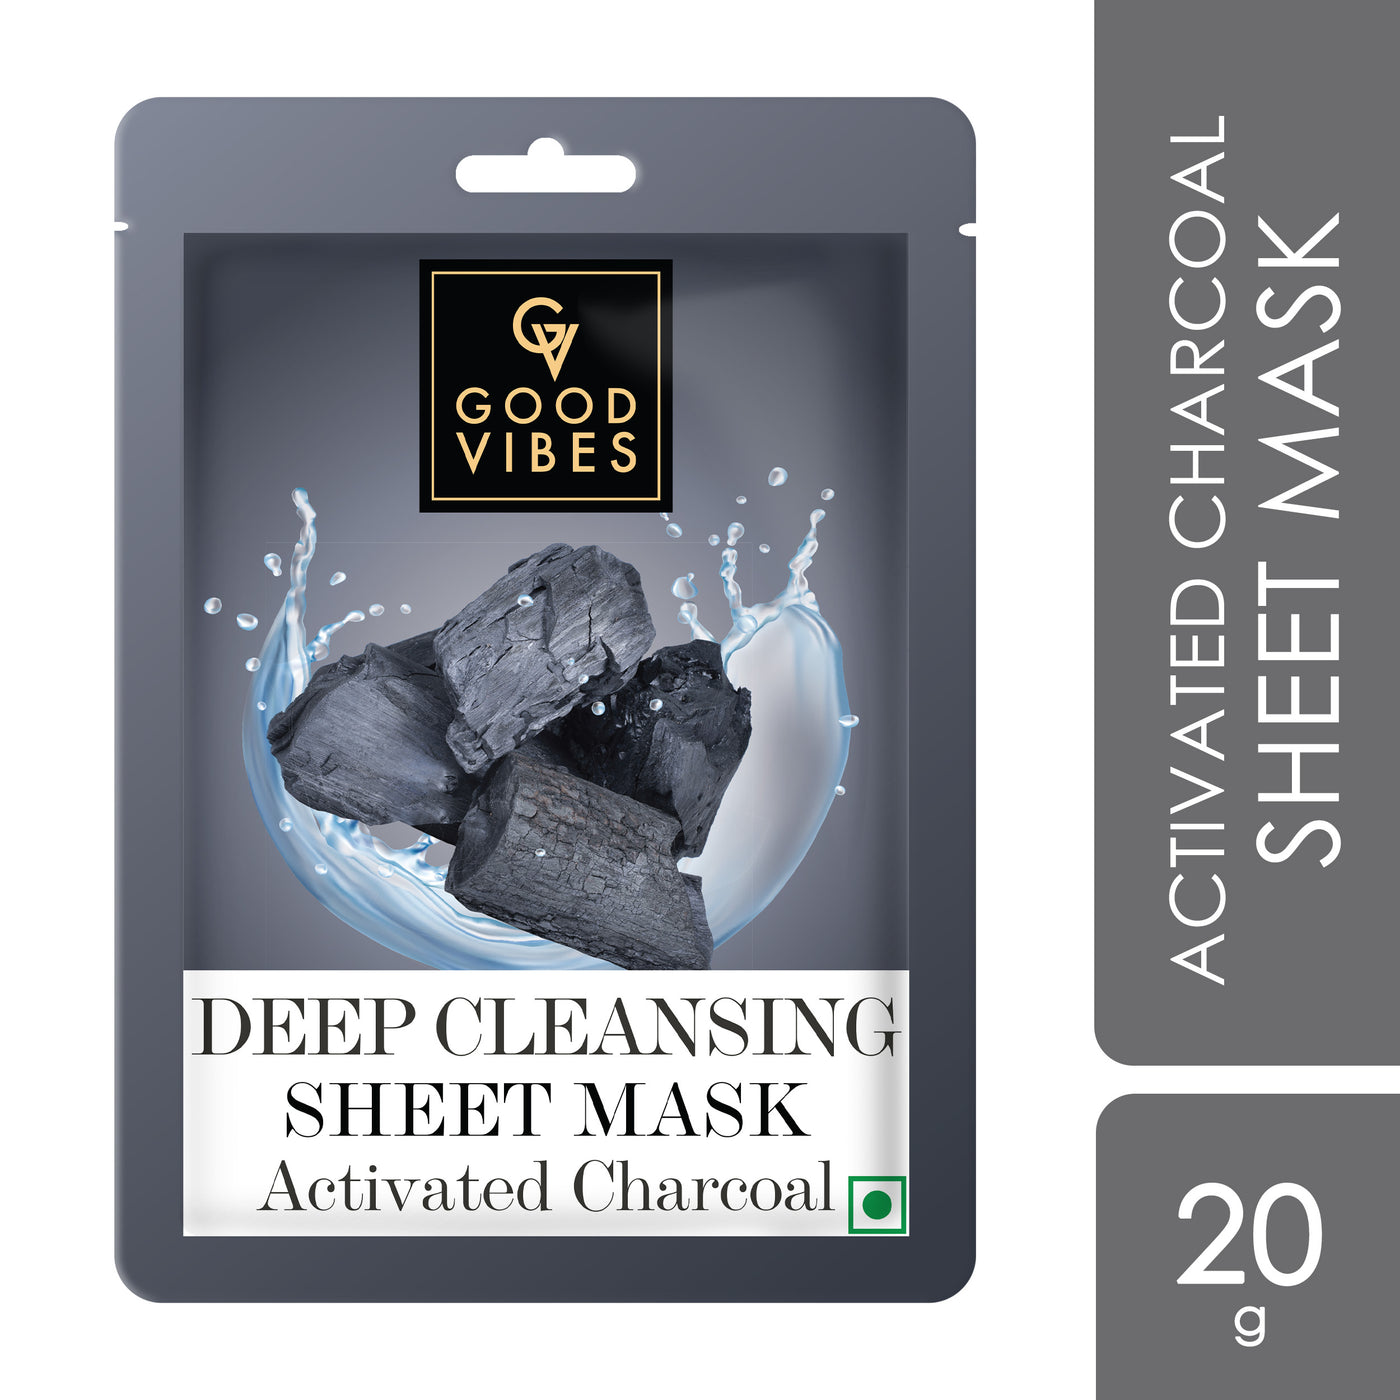 Activated Charcoal Deep Cleansing Sheet Mask